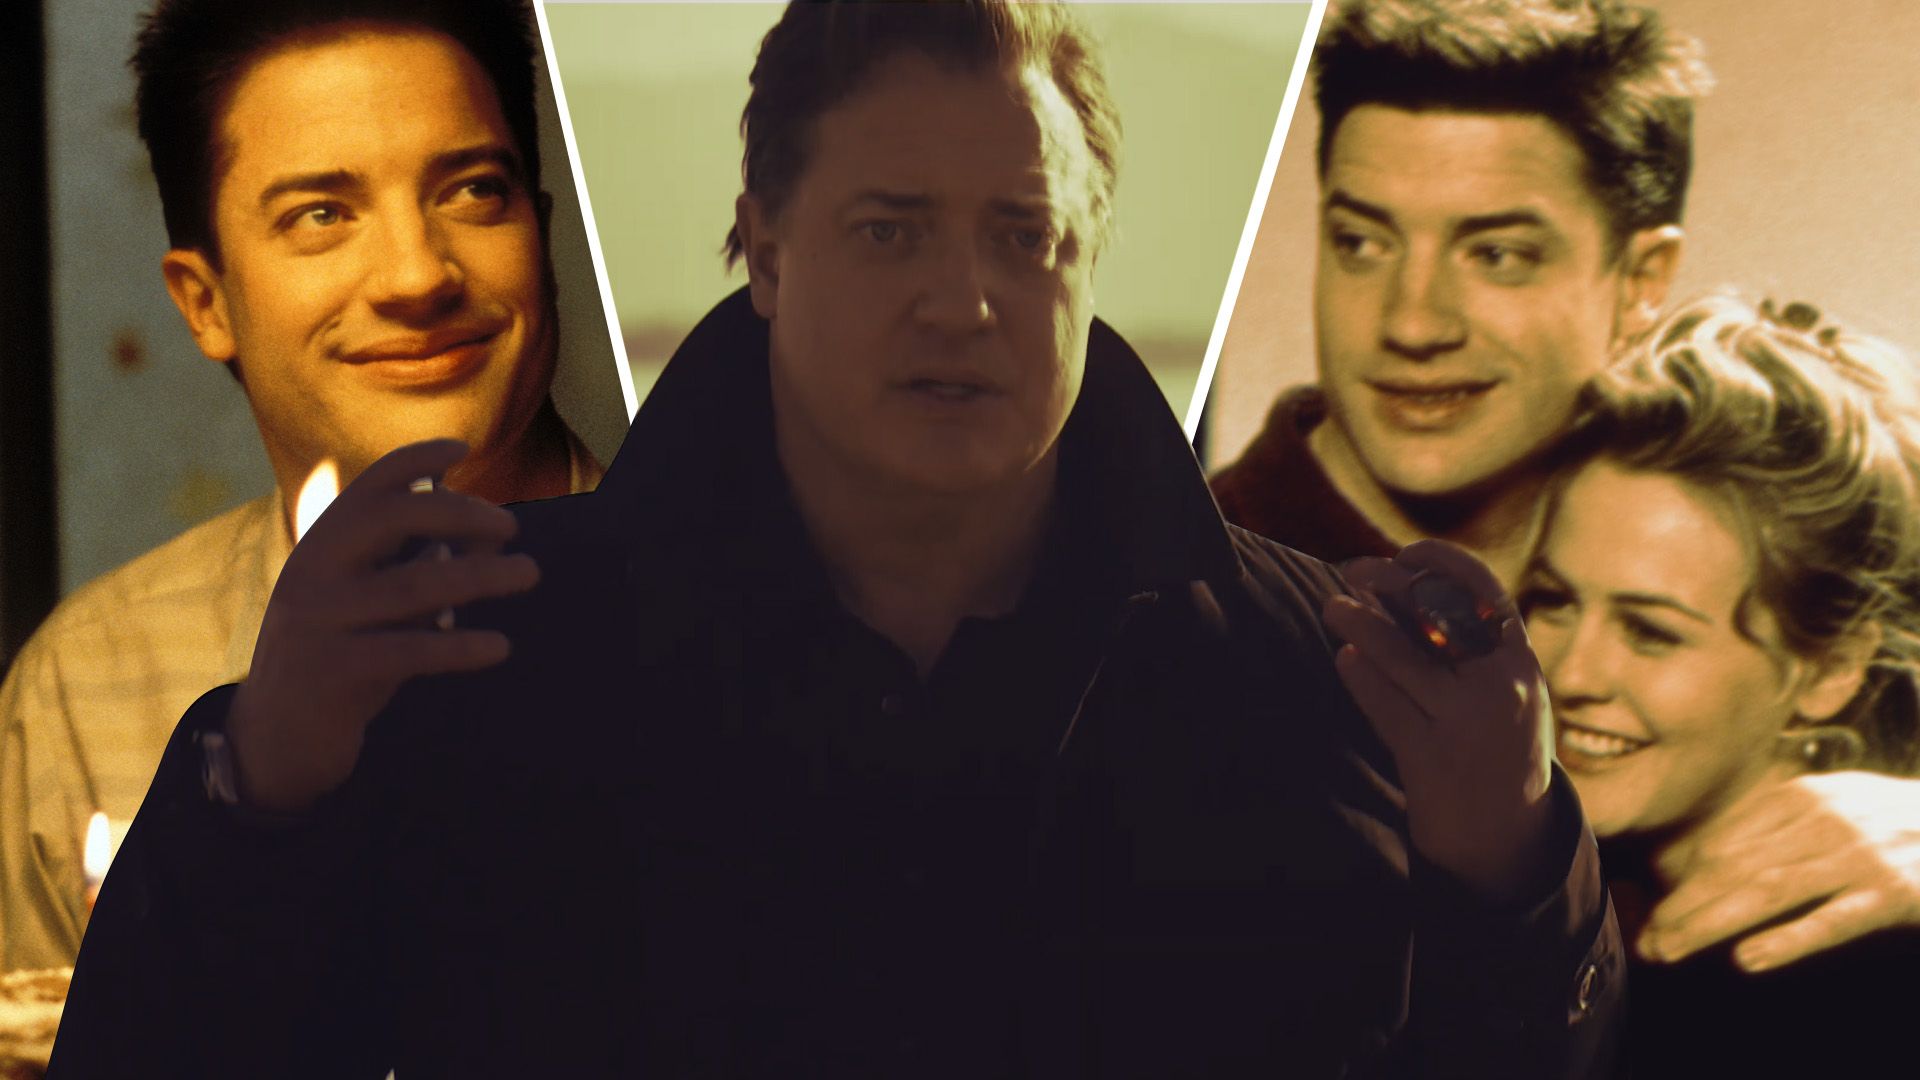 An edited image of Brendan Fraser wearing a black coat with Alicia Silverstone in Blast From the Past